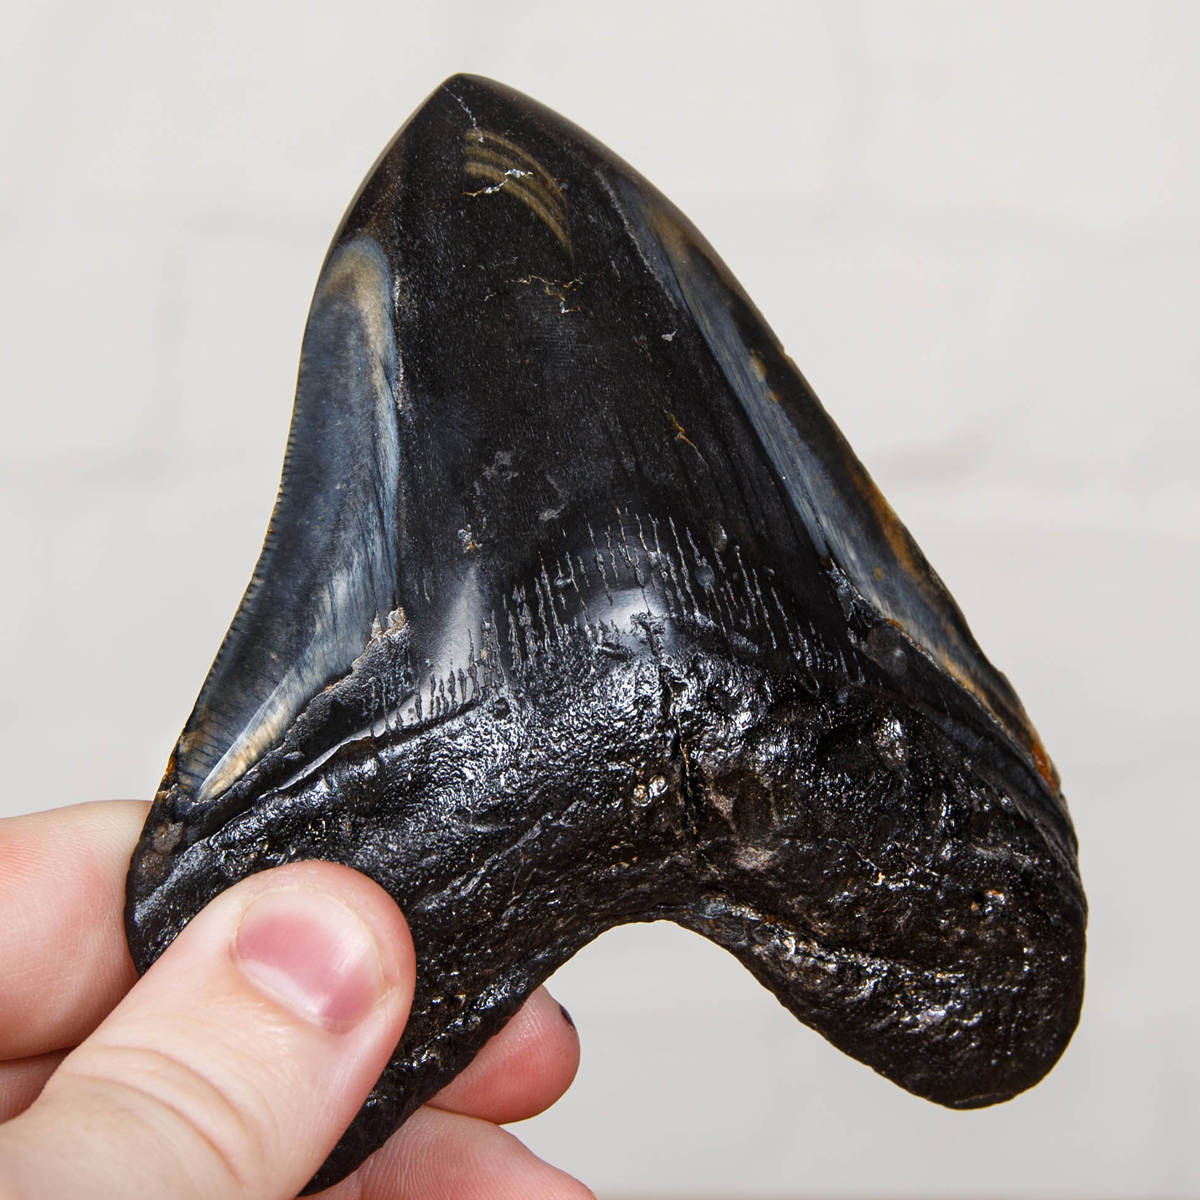 Collector Grade 4 Inch Polished Megalodon Shark Tooth Fossil on Stand (Carcharodon megalodon)